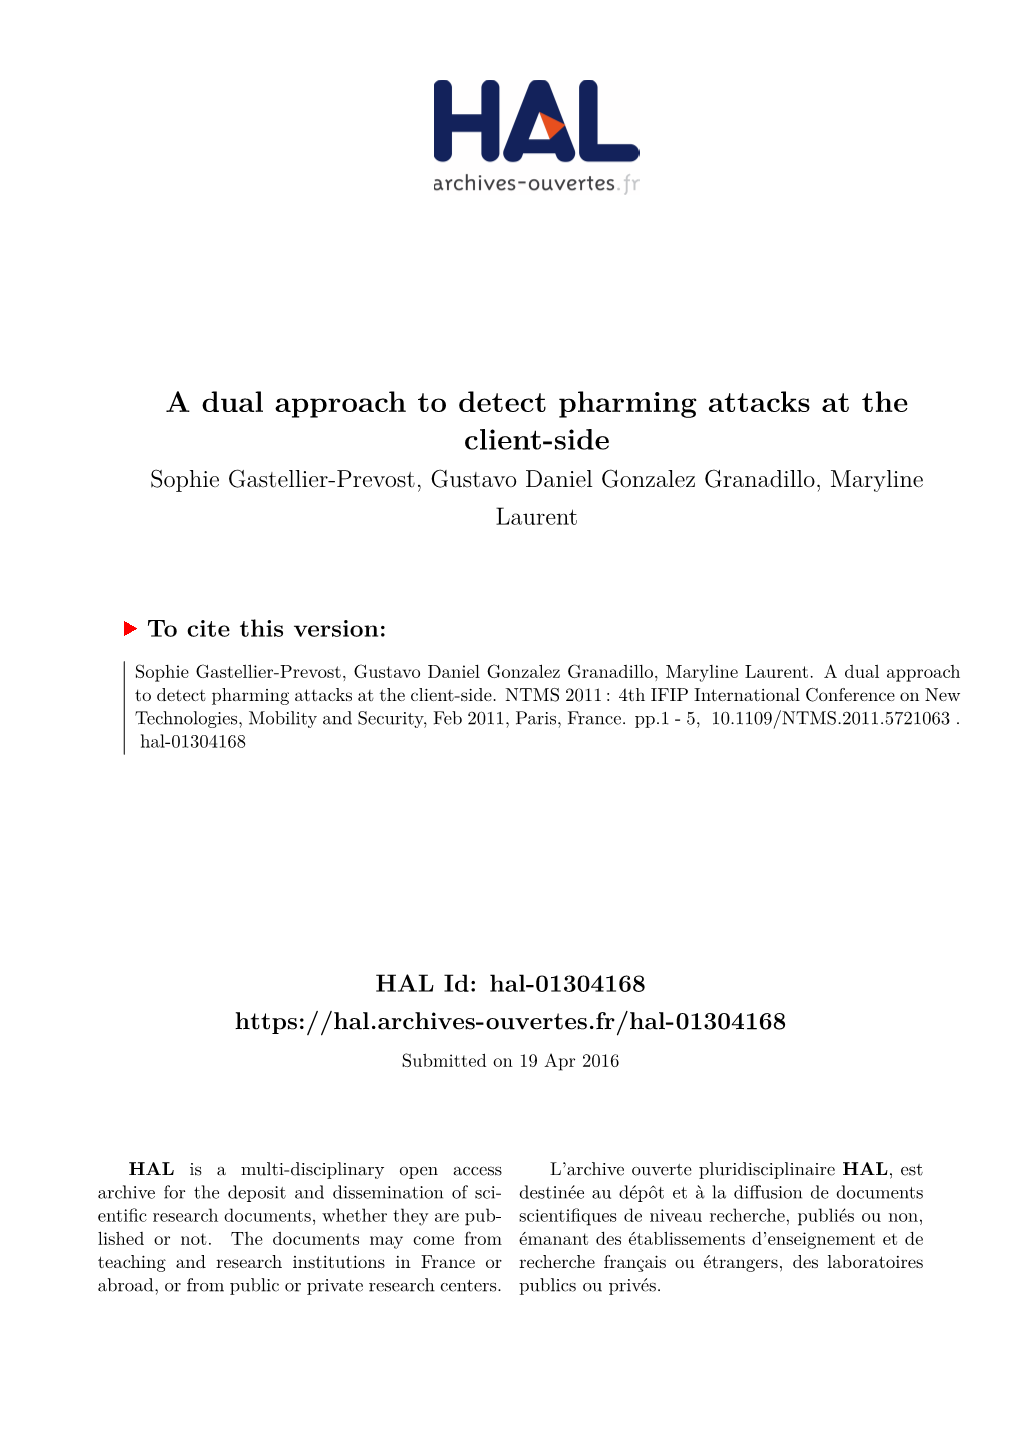 A Dual Approach to Detect Pharming Attacks at the Client-Side Sophie Gastellier-Prevost, Gustavo Daniel Gonzalez Granadillo, Maryline Laurent